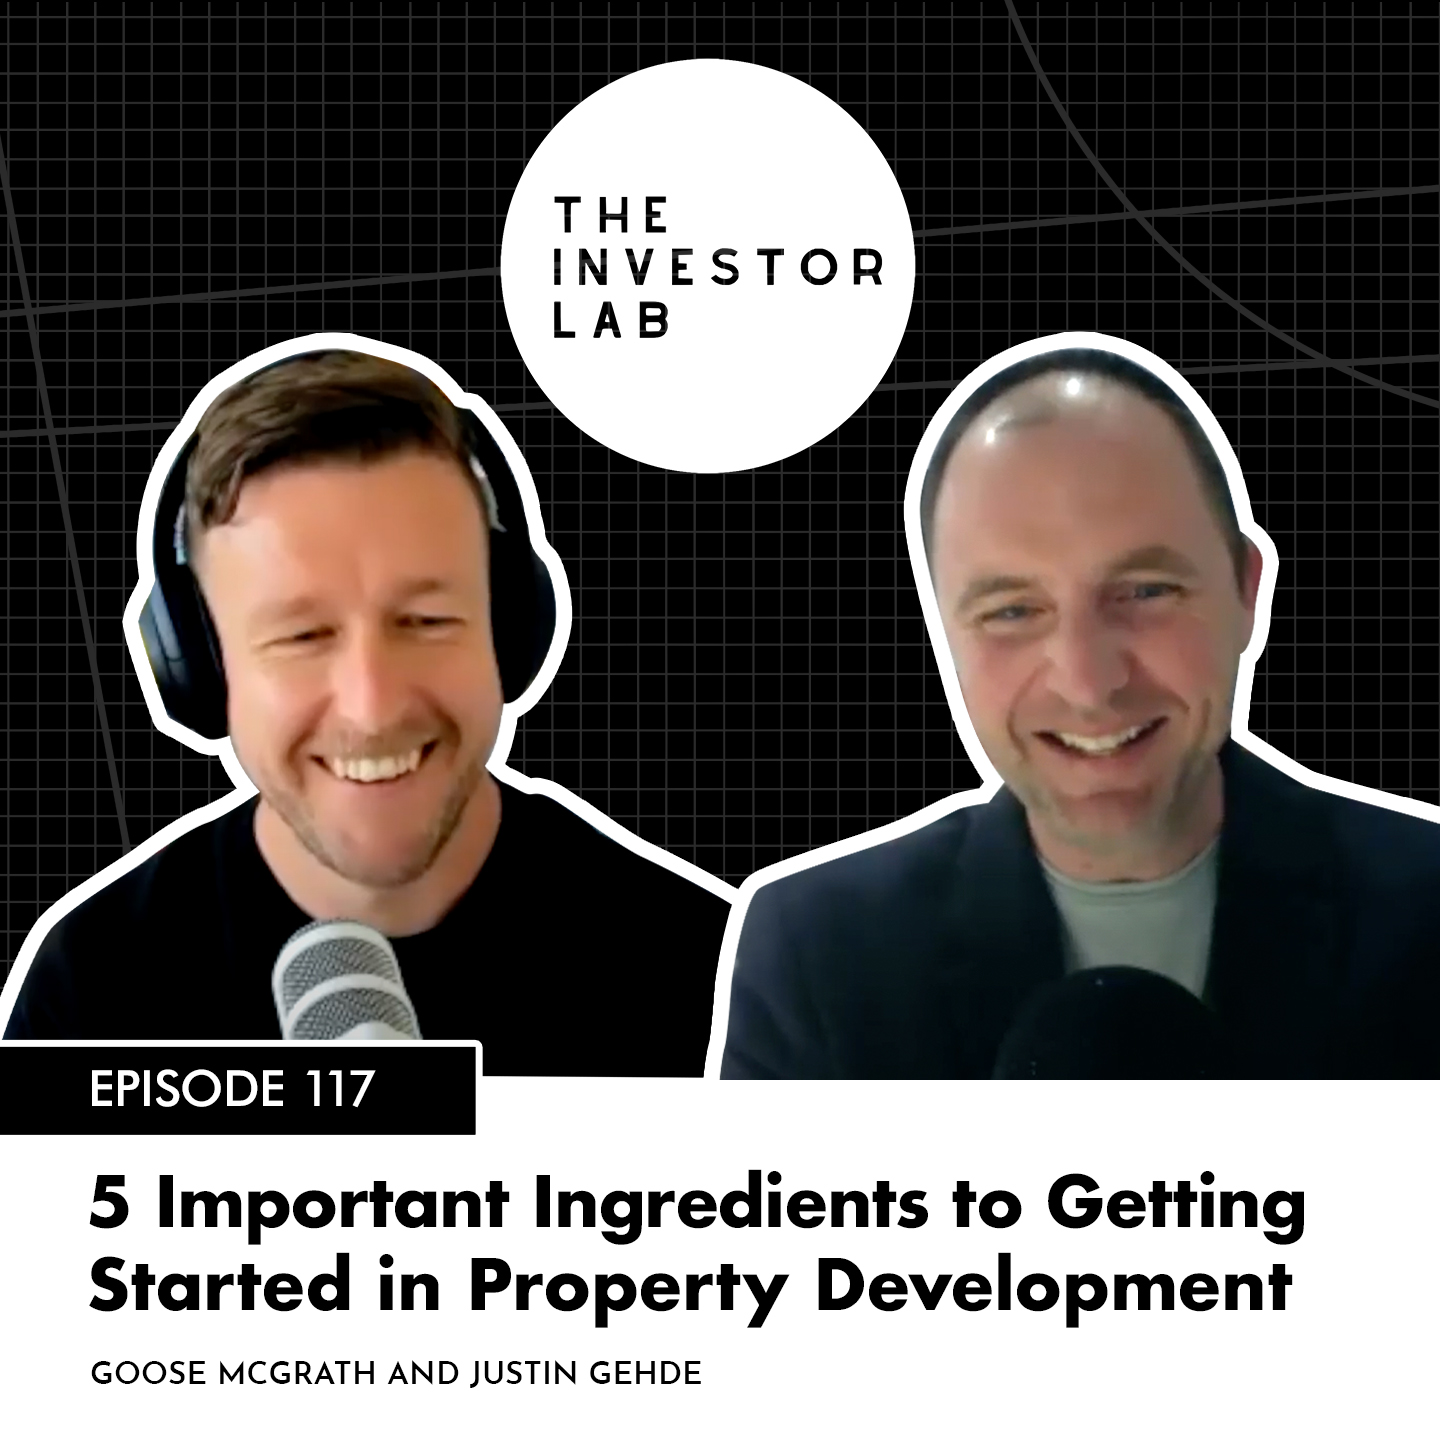 5 Important Ingredients to Getting Started In Property Development  with Justin Gehde